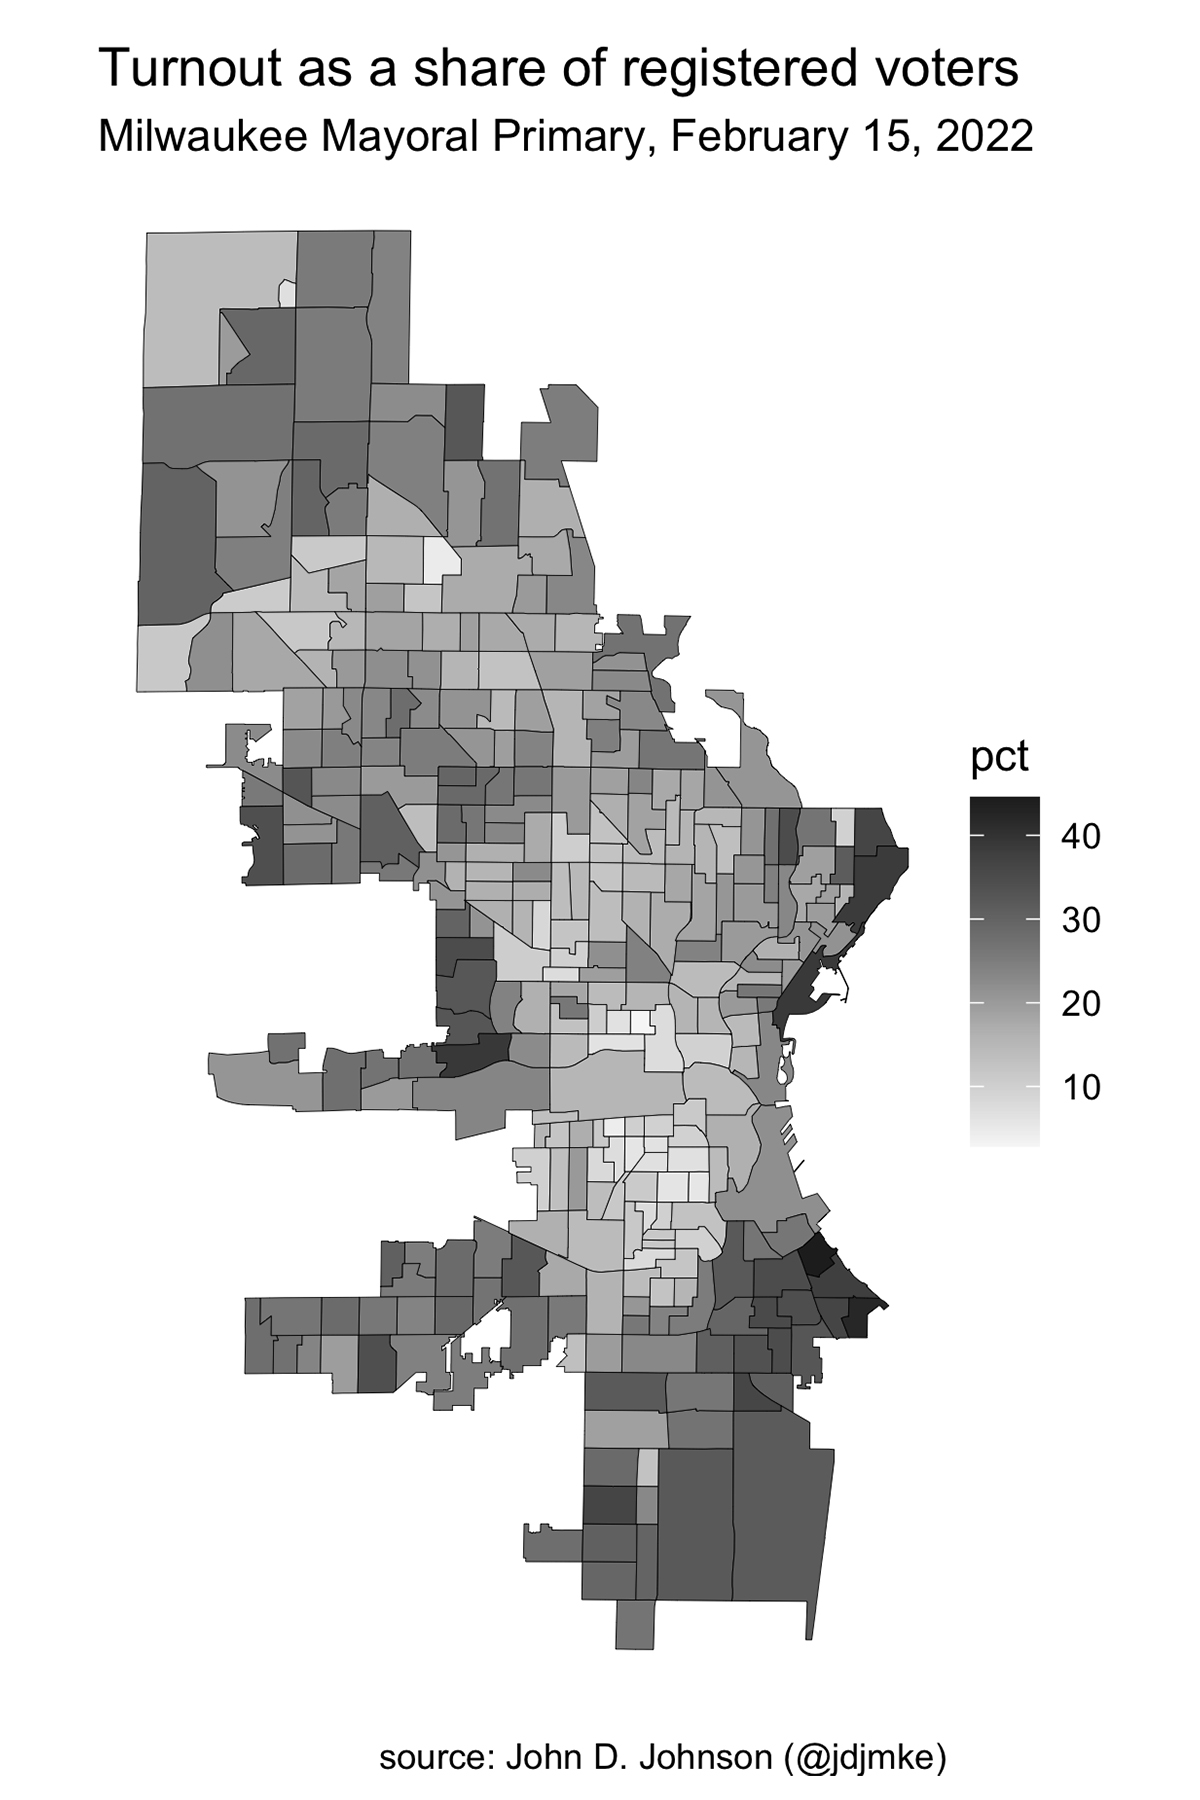 A map shows voter turnout by ward in the 2022 Milwaukee mayoral primary with shading indicating percentage levels.